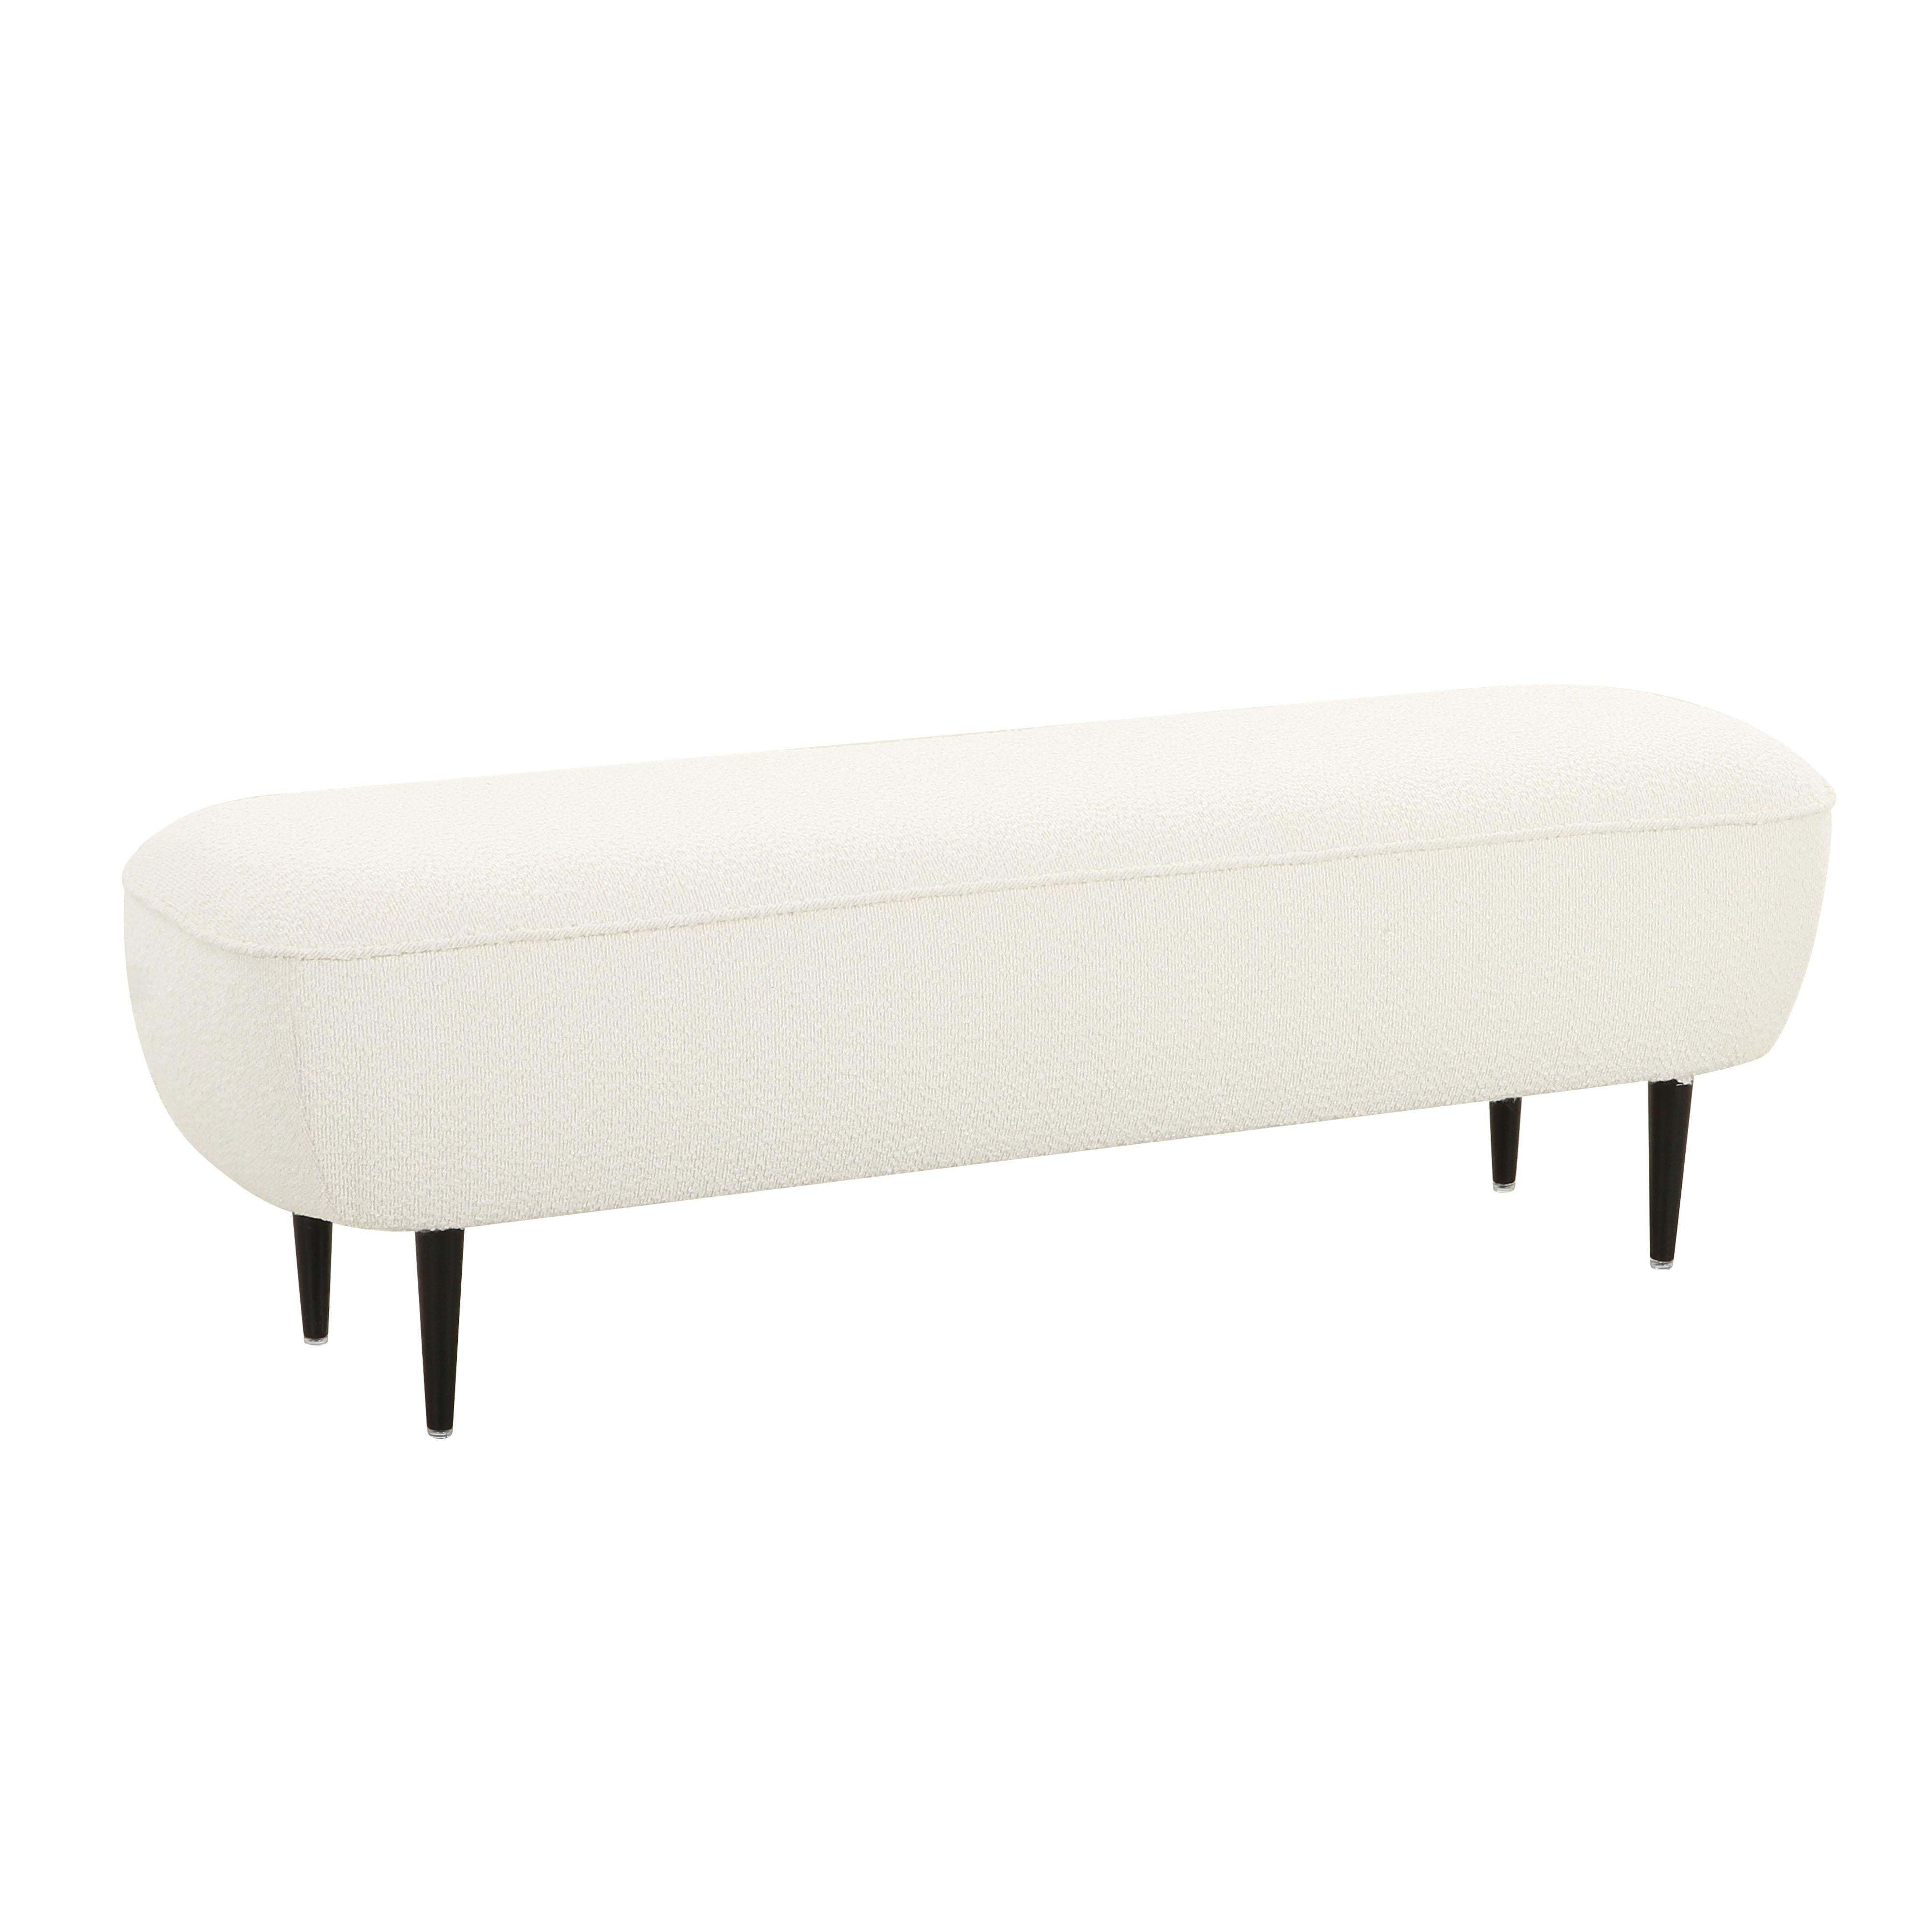 Tov Furniture Benches - Denise Cream Boucle Bench